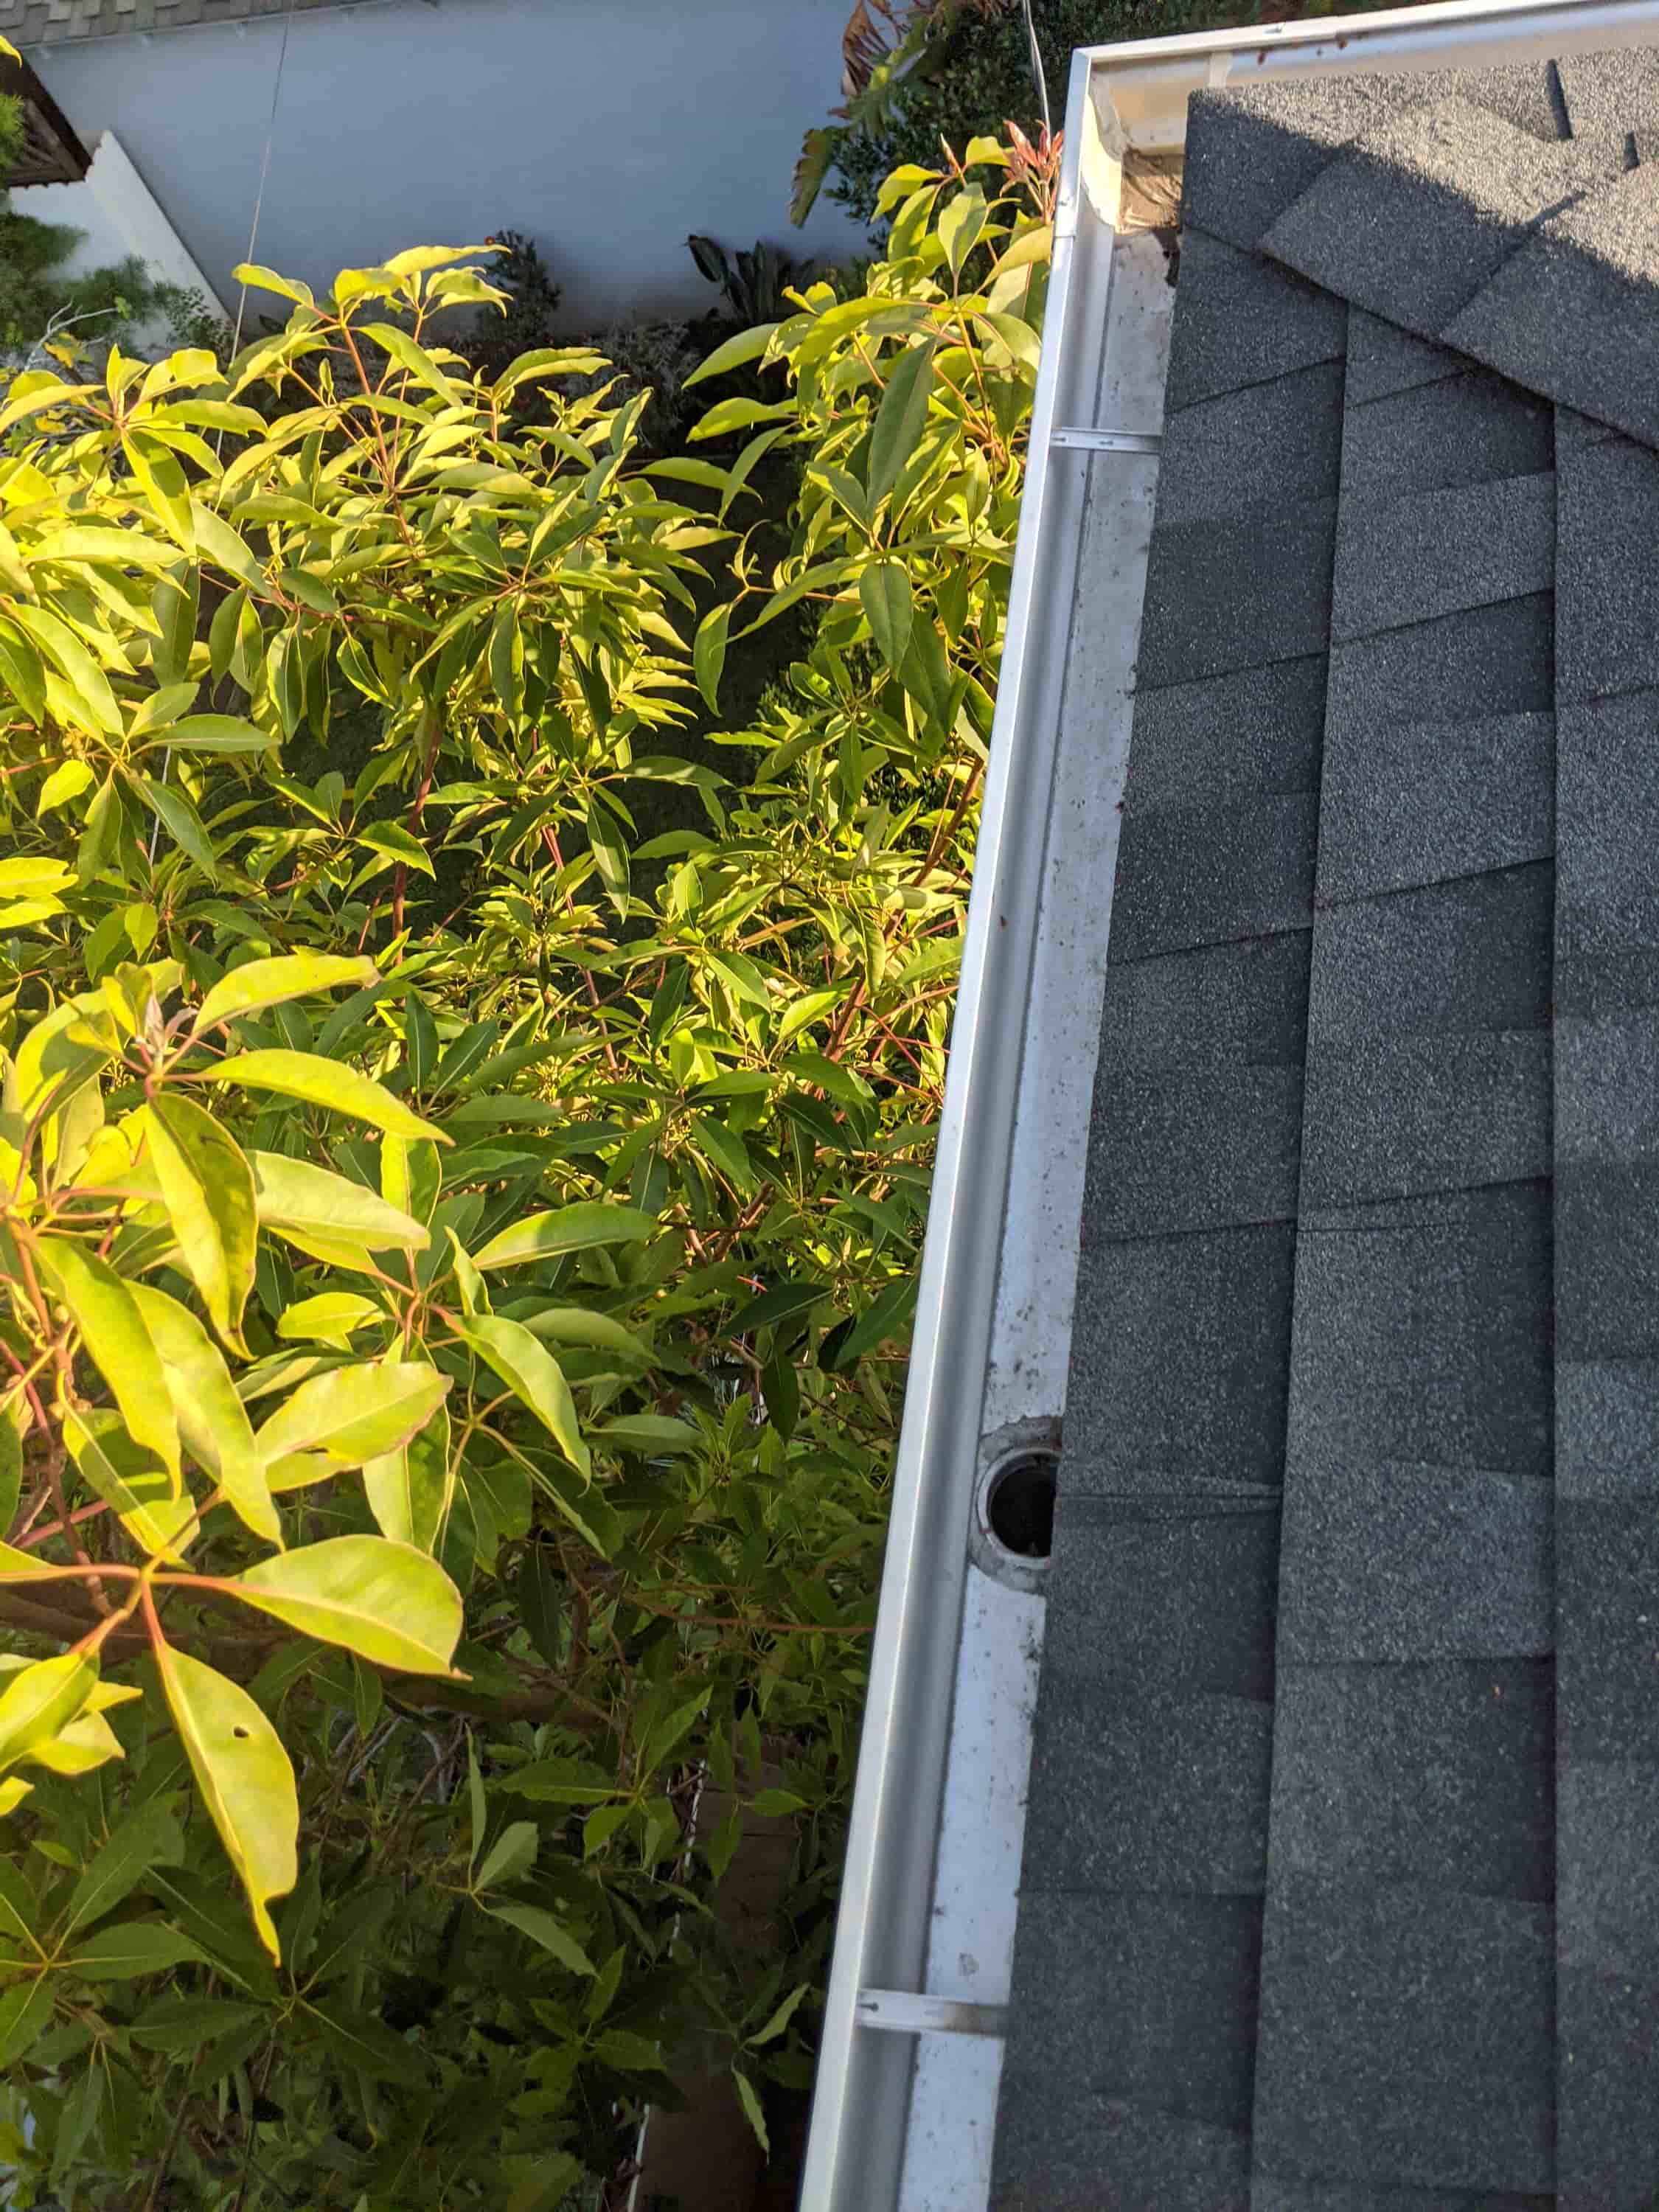 gutter repair and cleaning